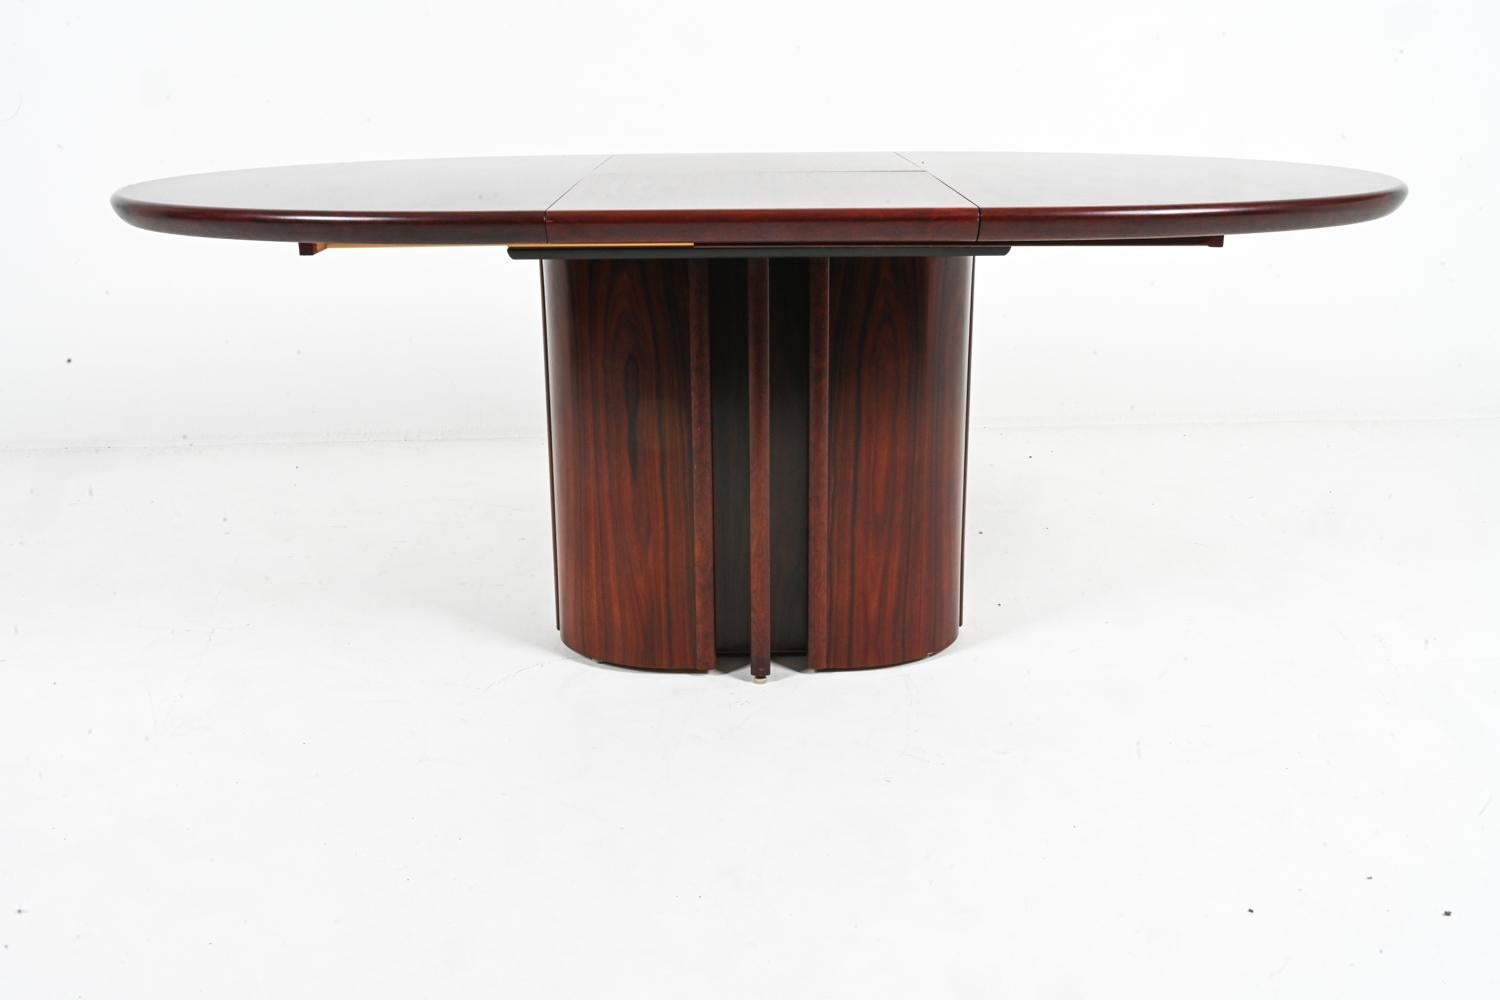 Danish Art Deco-Style Butterfly Leaf Dining Table by Skovby, Denmark 1970's For Sale